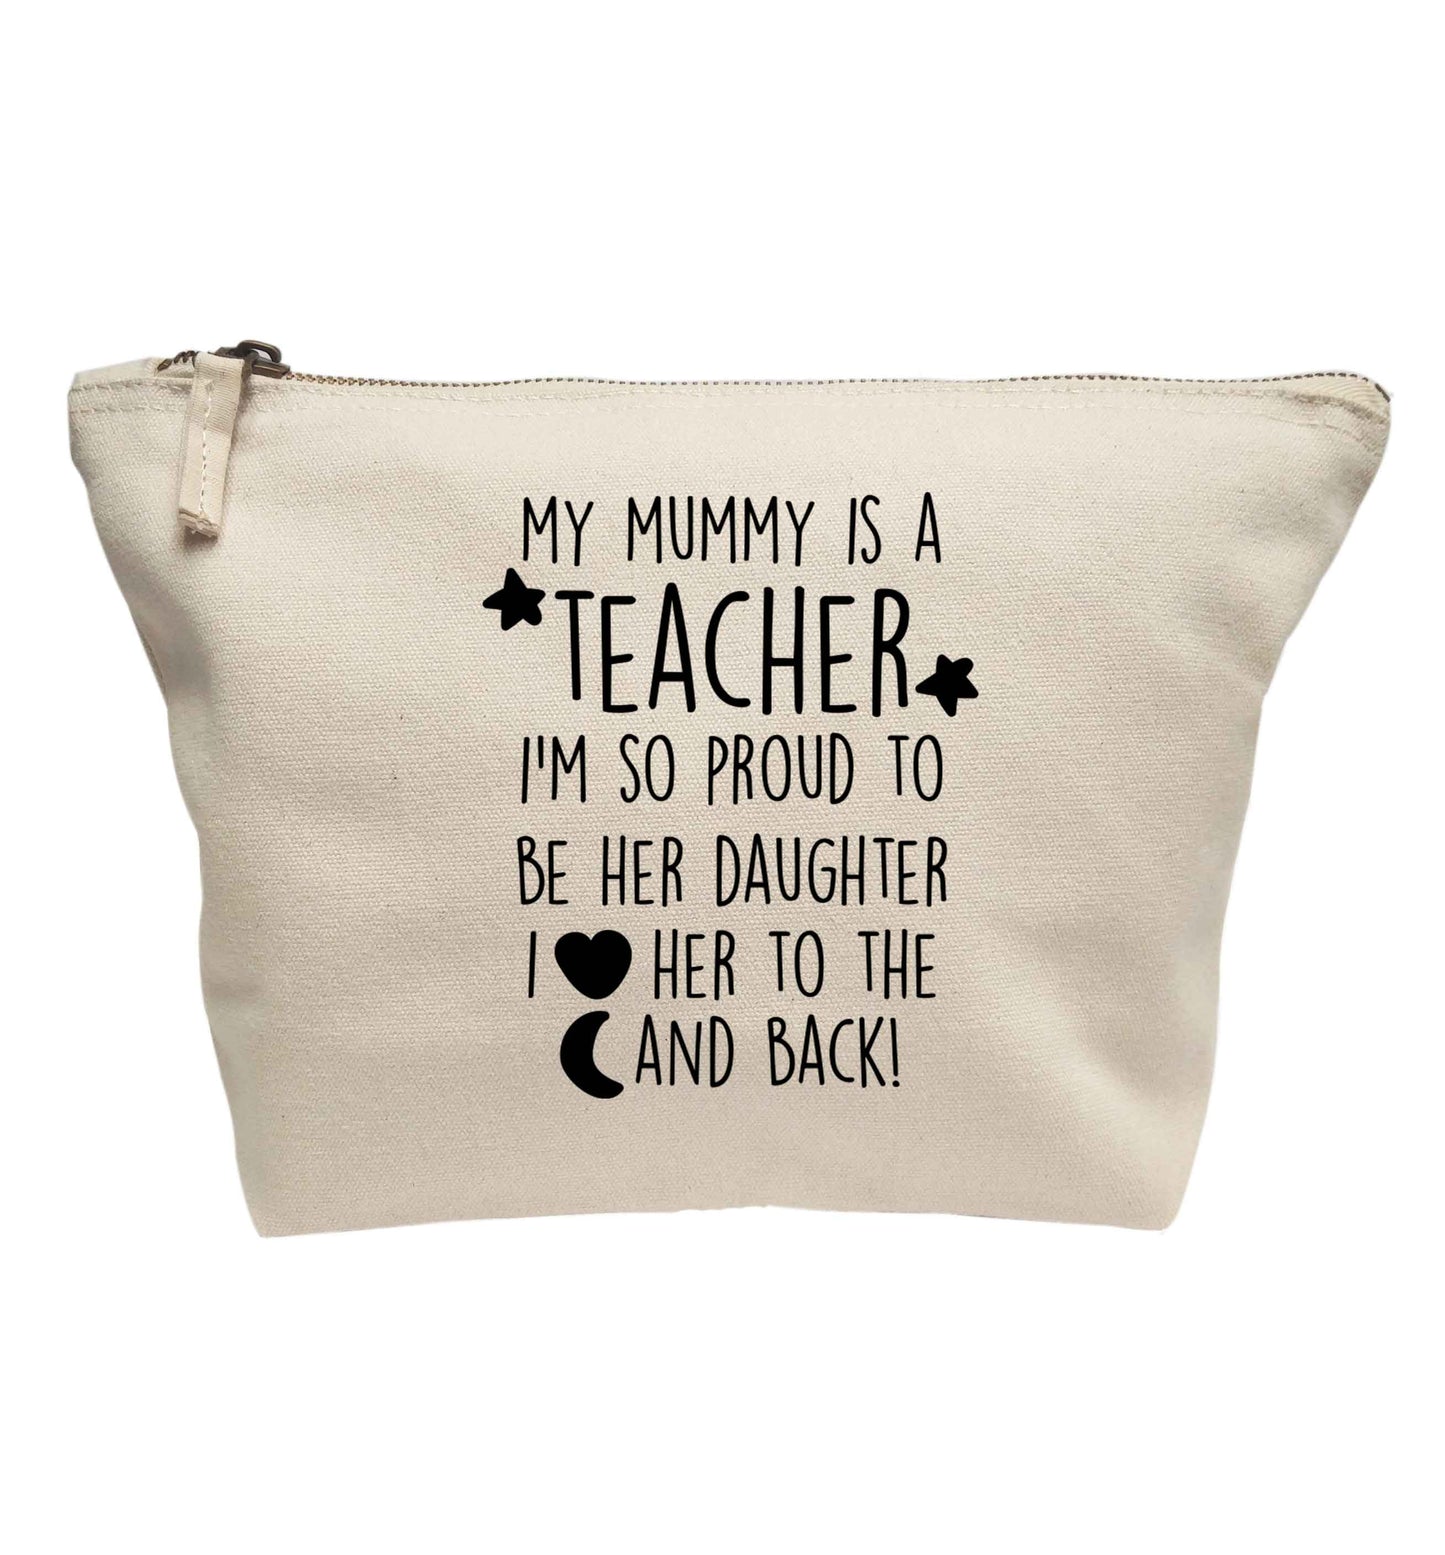 My mummy is a teacher I'm so proud to be her daughter I love her to the moon and back | Makeup / wash bag